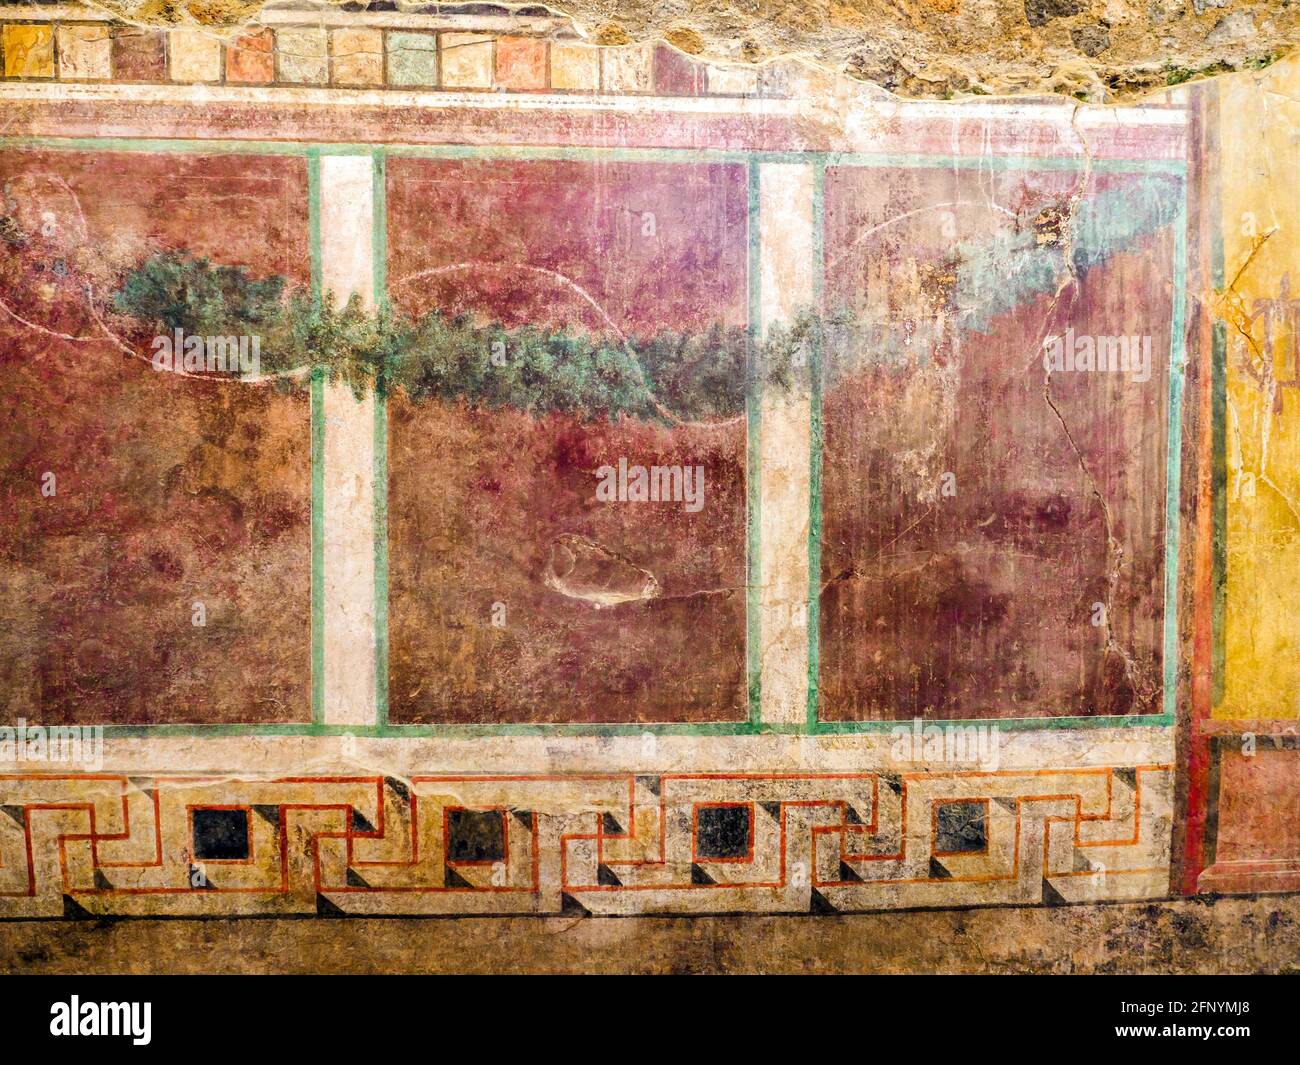 Fresco decorated walls in the House of the Cryptoporticus (Casa del Criptoportico) - Pompeii archaeological site, Italy Stock Photo